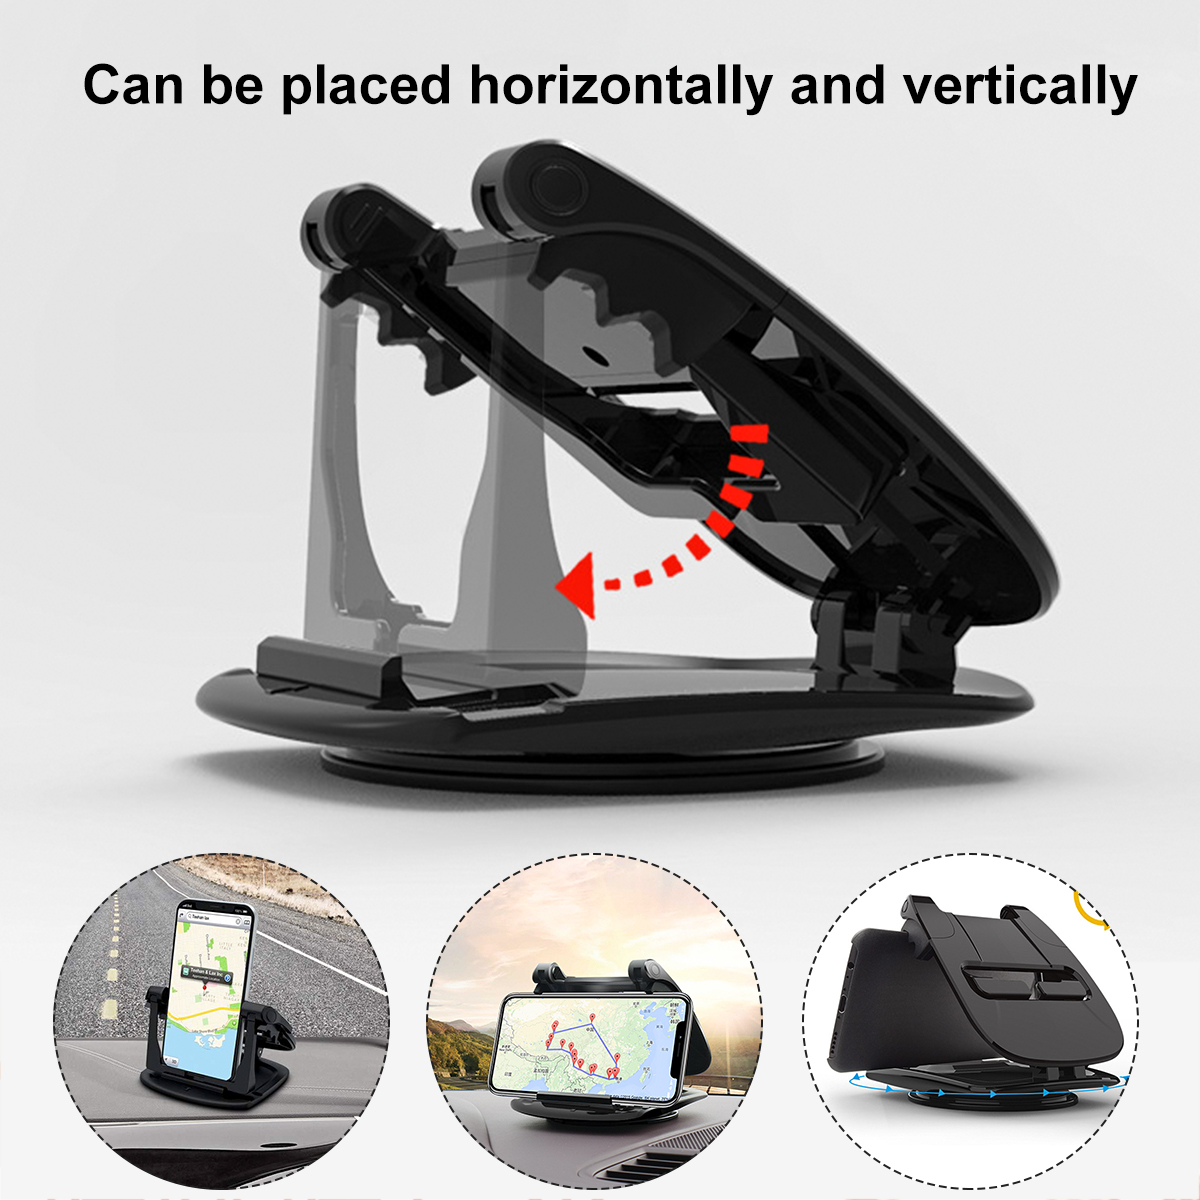 Foldable-Multifunctional-Horizontal-Vertical-Car-Dashboard-Mount-Mobile-Phone-GPS-Holder-Stand-for-3-1791104-4